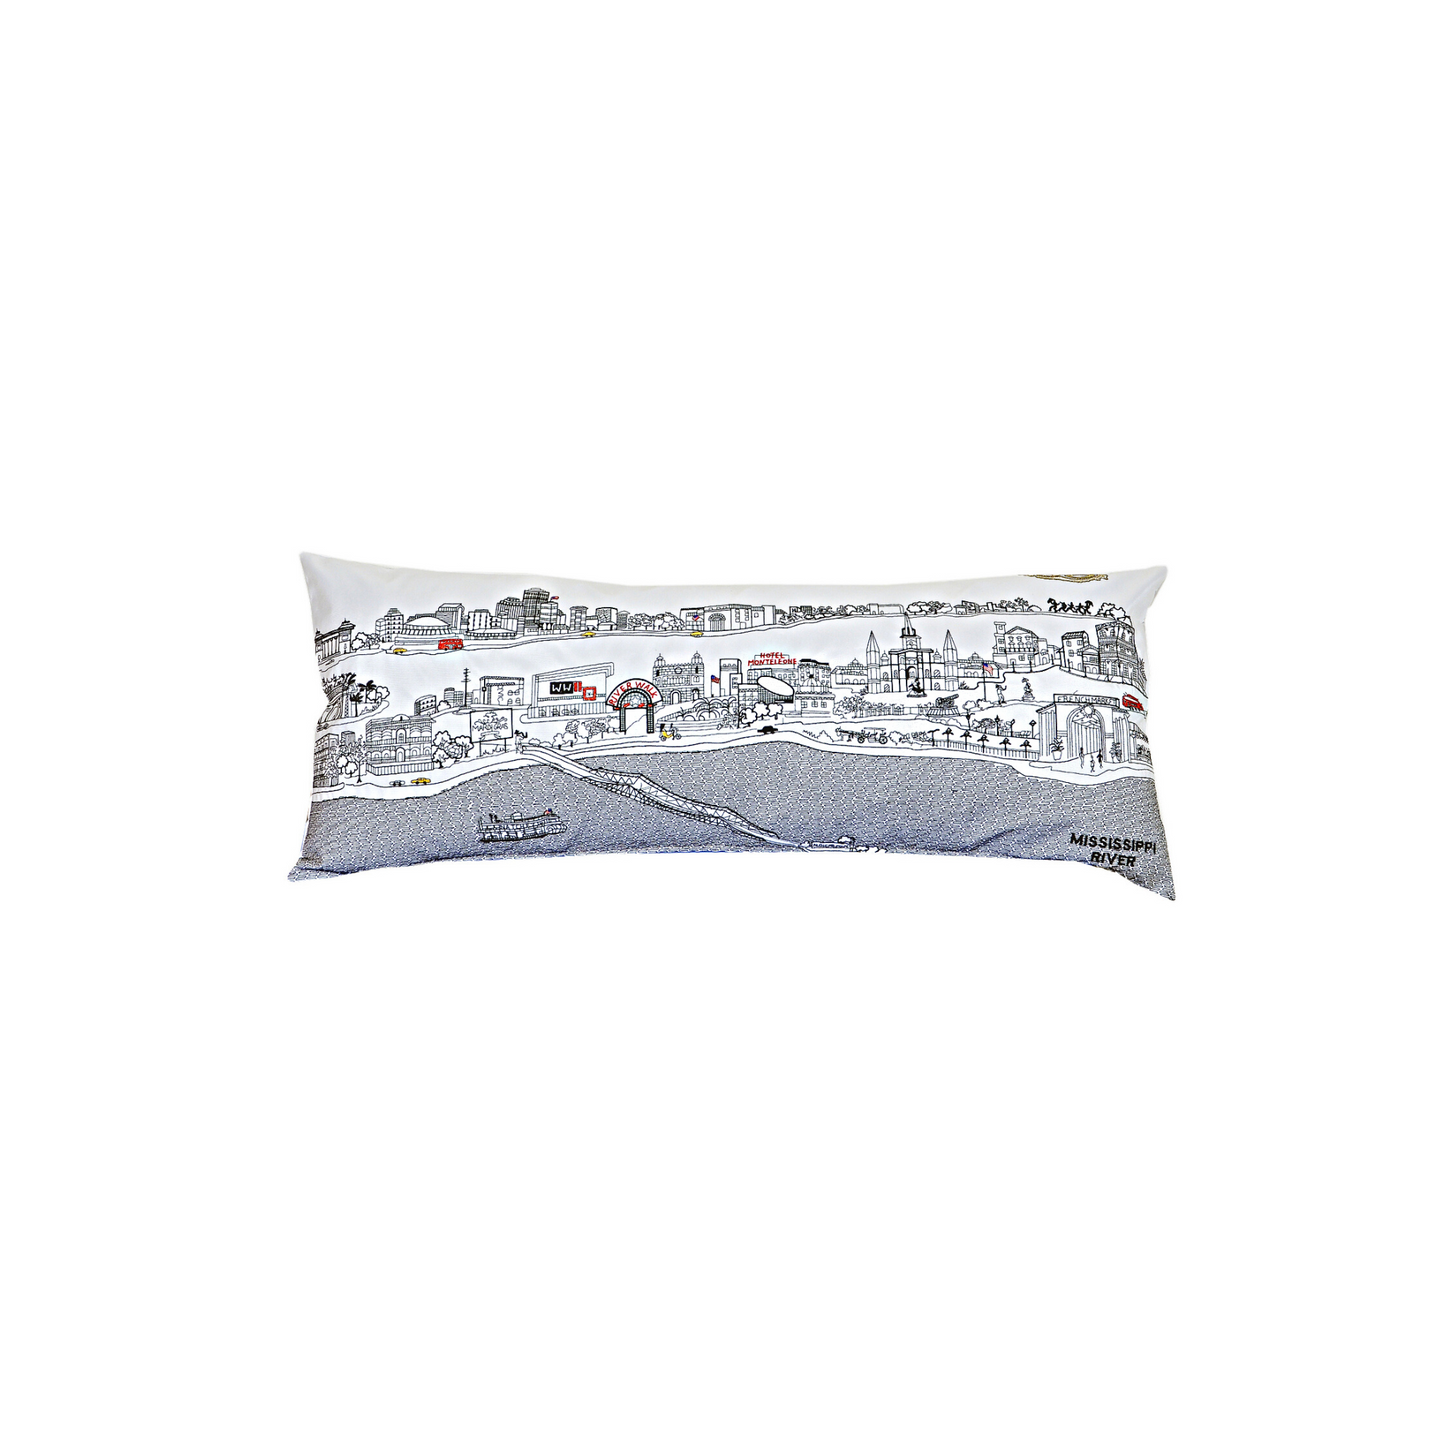 New Orleans Outdoor Pillow